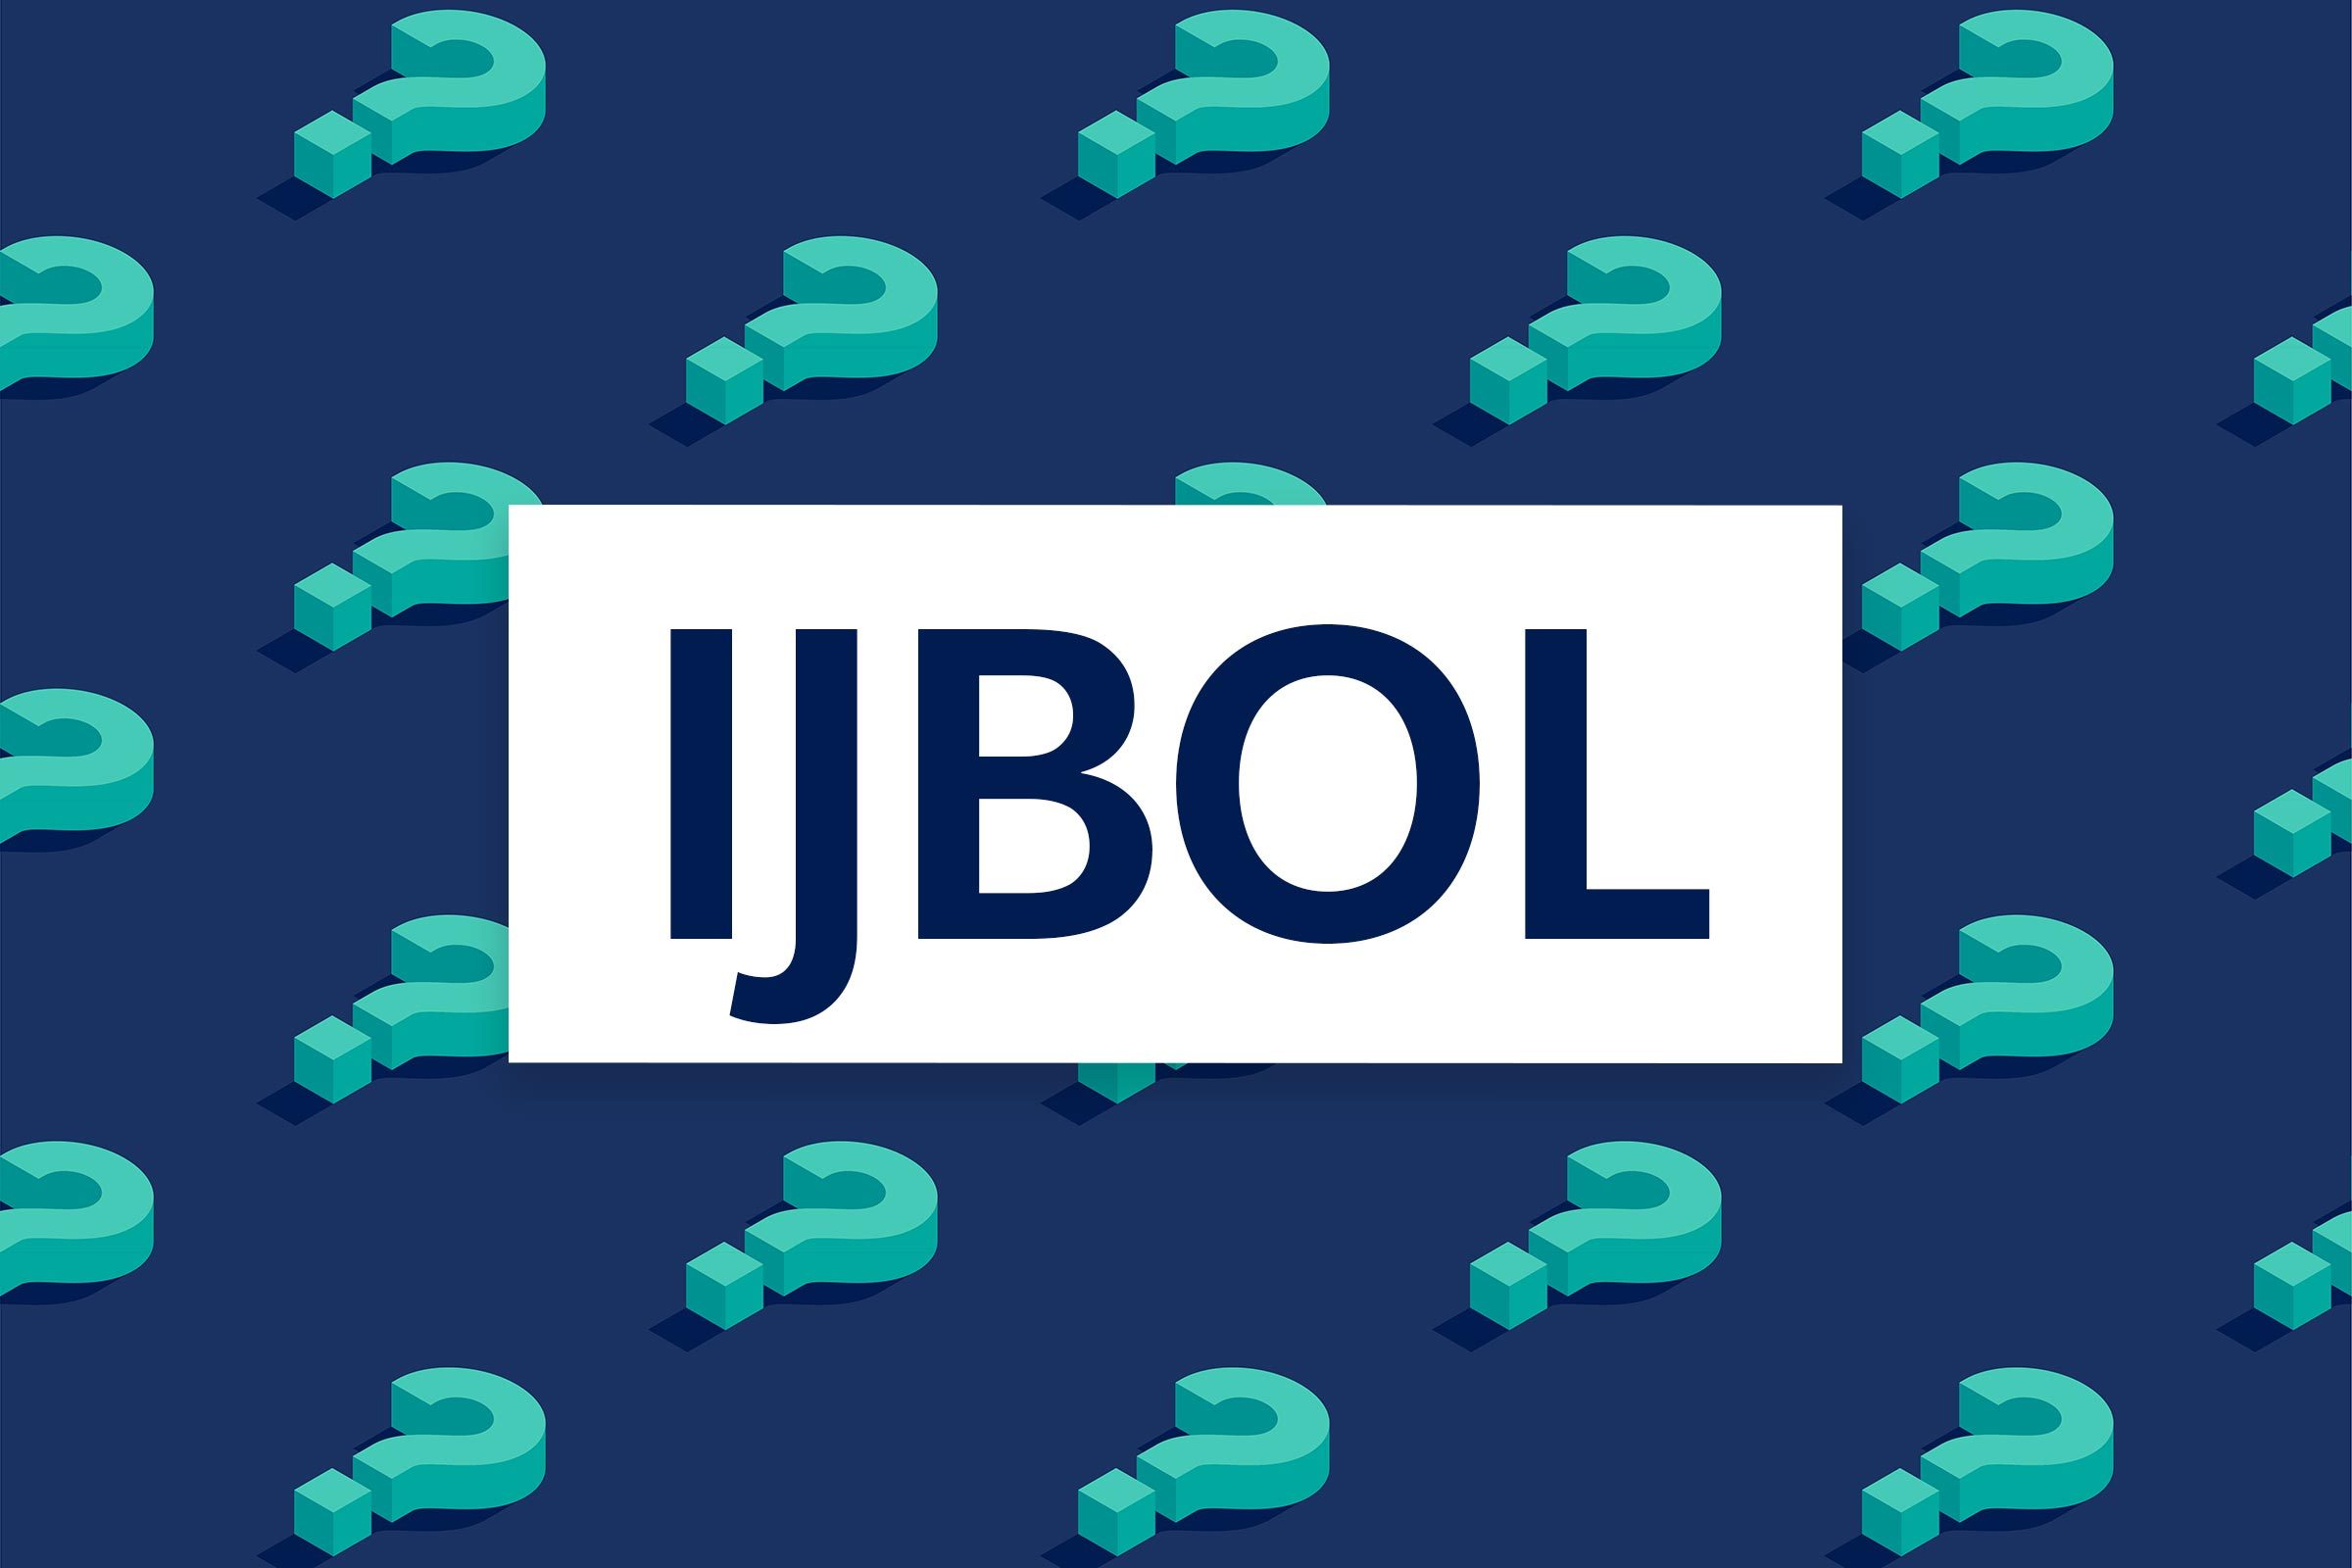 Move over LOL, because IJBOL has replaced it. Here's what it means